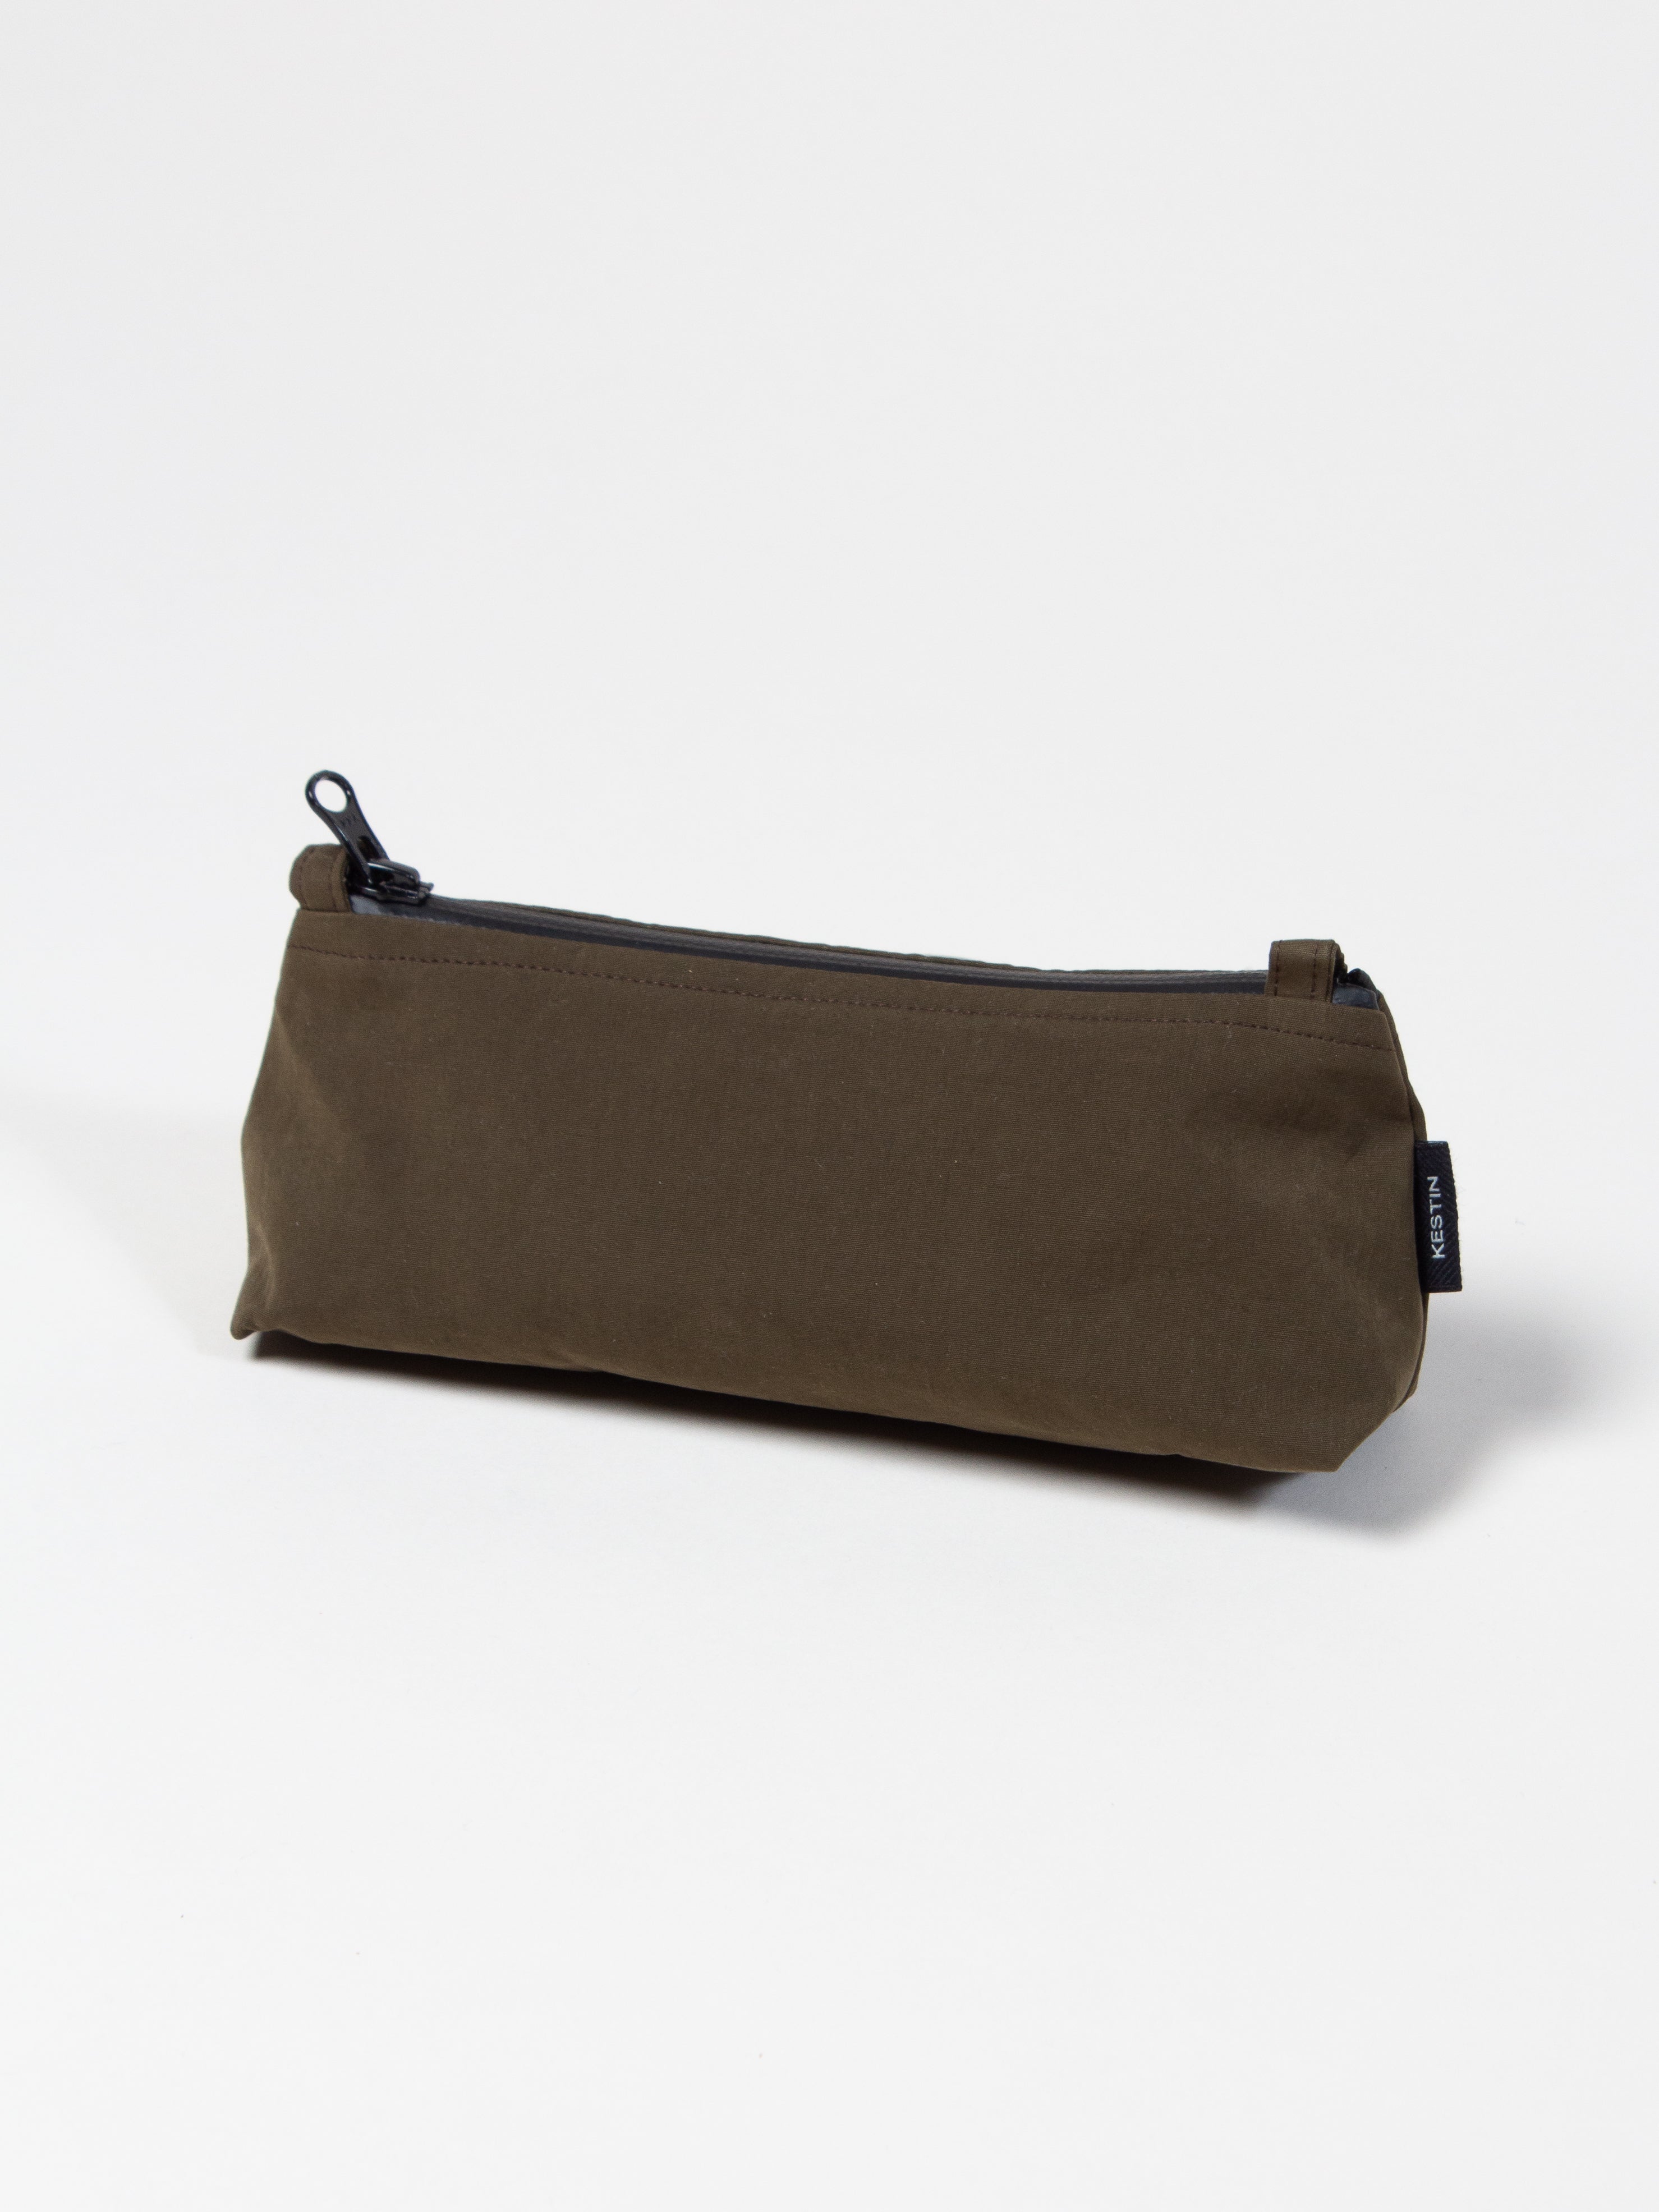 Newhaven Pencil Case In Olive Water Repellent Cotton/Nylon